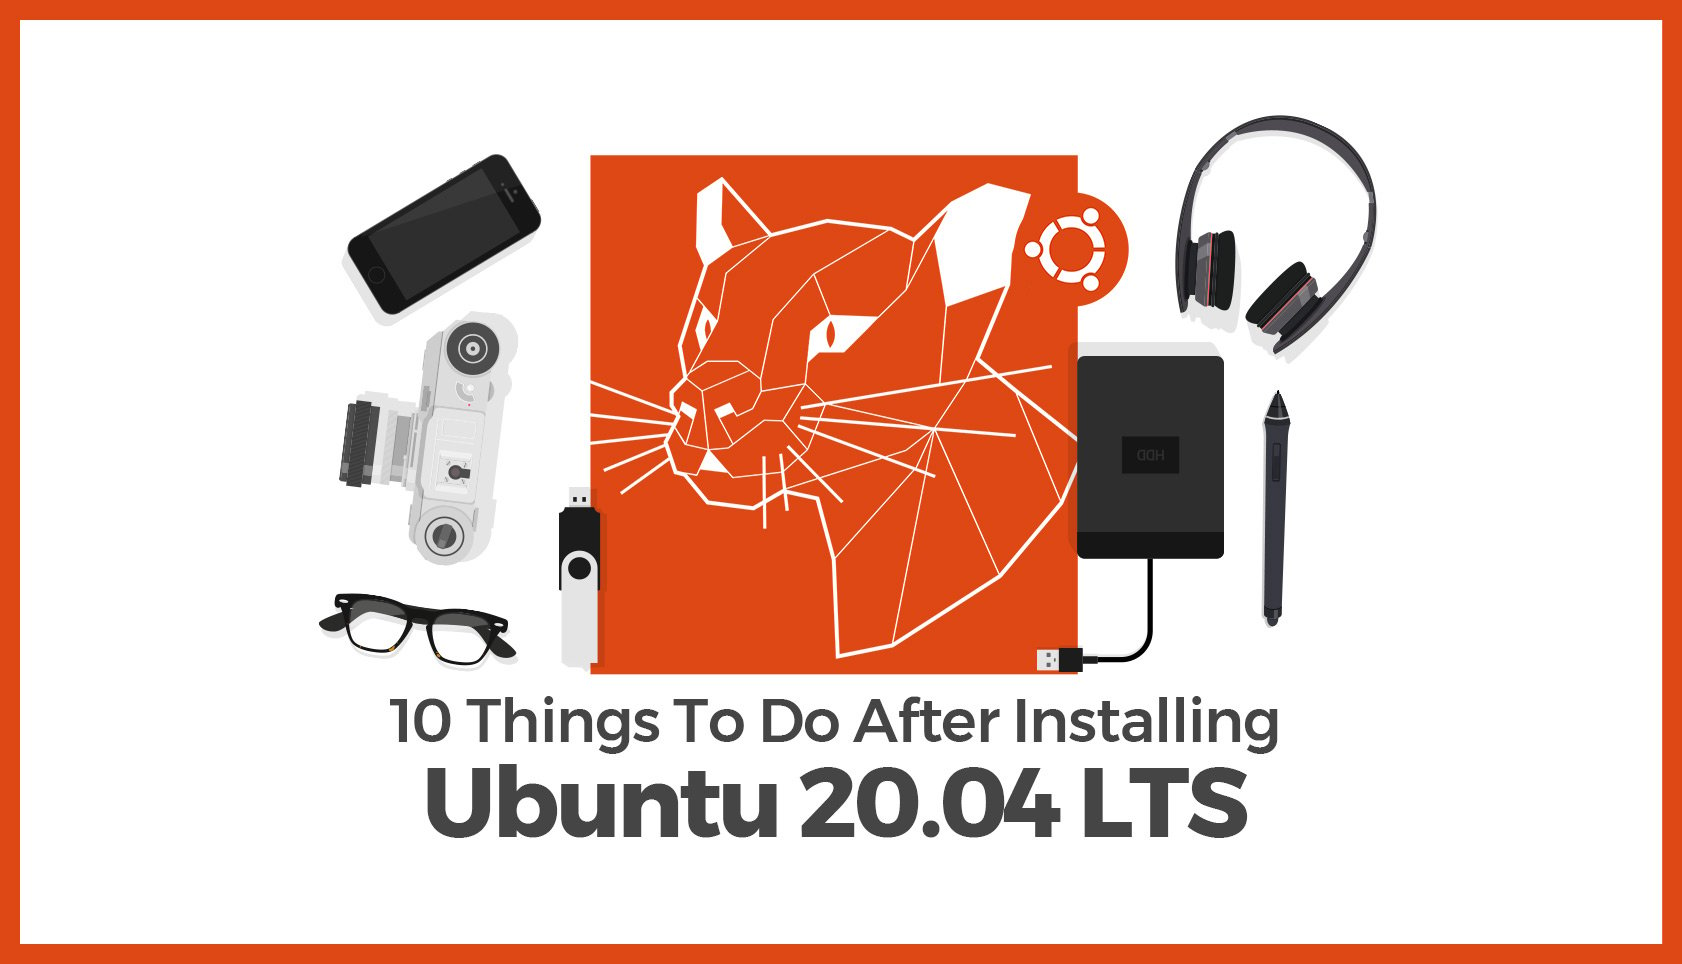 10 Things To Do After Installing Ubuntu 20.04 LTS – And 4 Things You Shouldn’t!